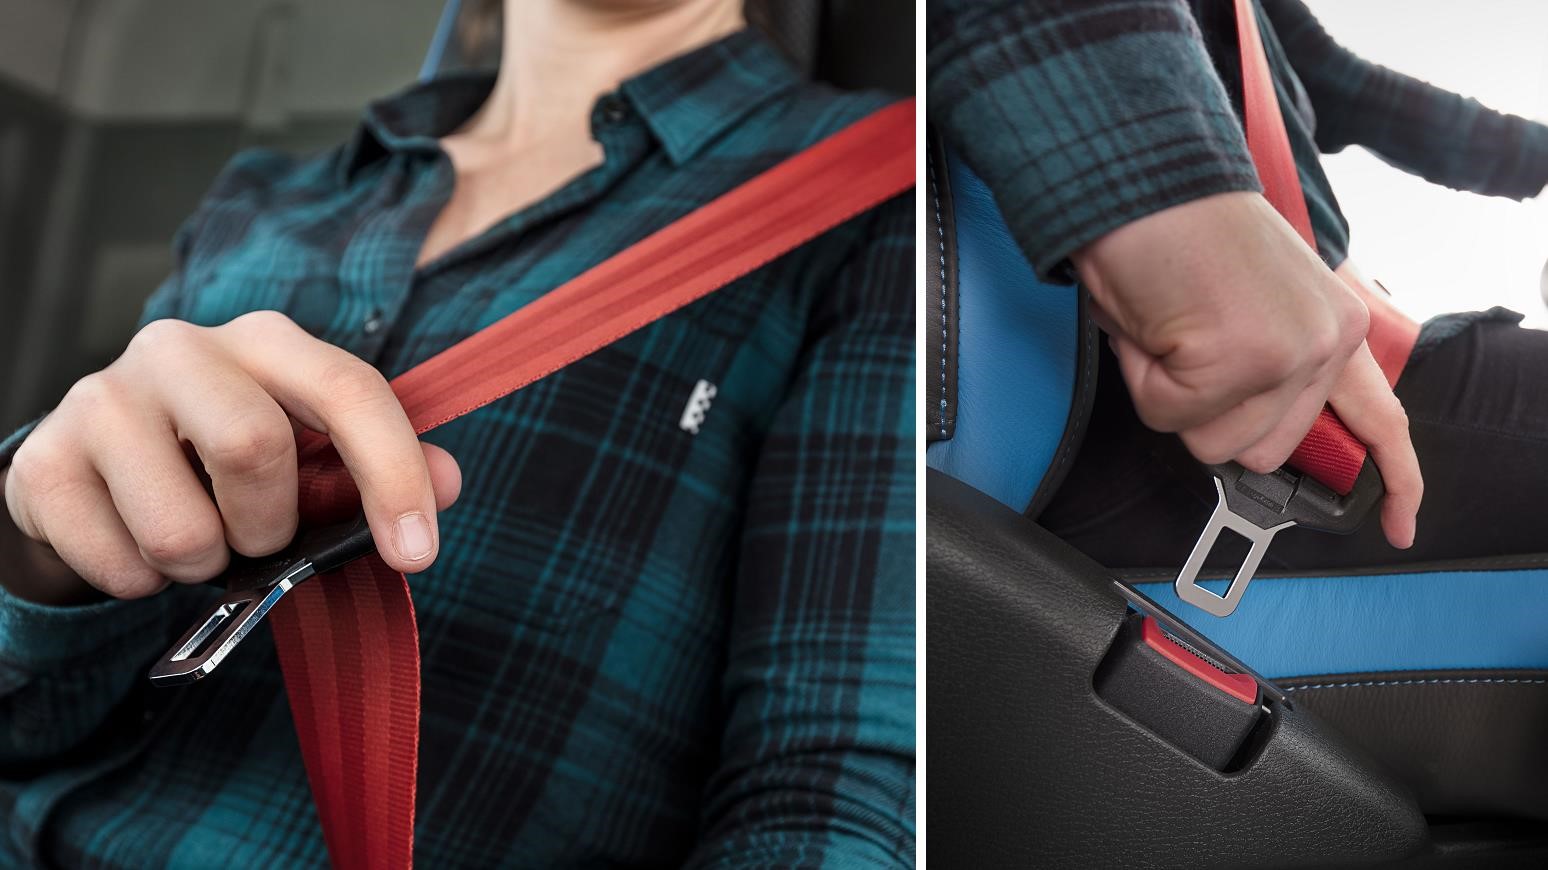 This Year Marks The 60th Anniversary Of The Seatbelt, Invented By A Volvo Safety Engineer In 1959